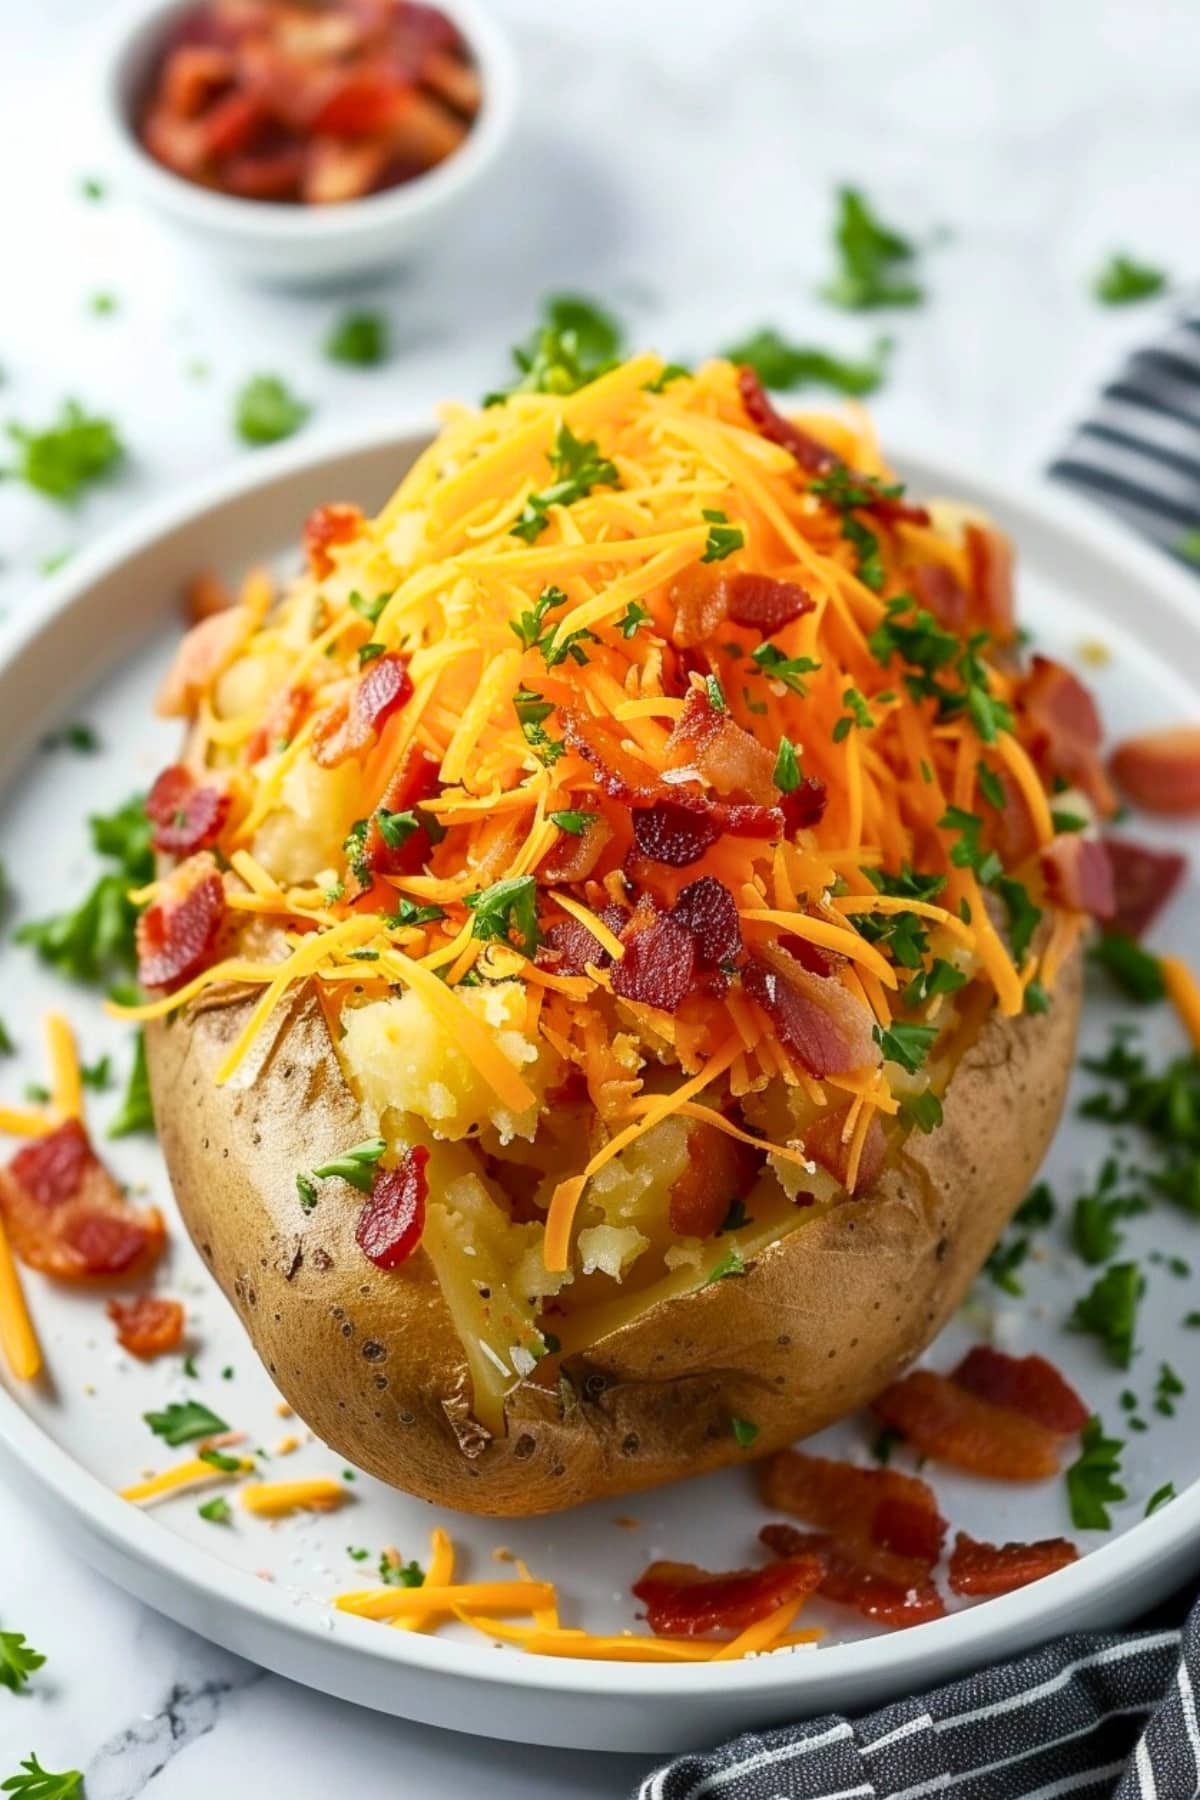 Baked potato on a plate topped with shredded cheese and bacon bits.